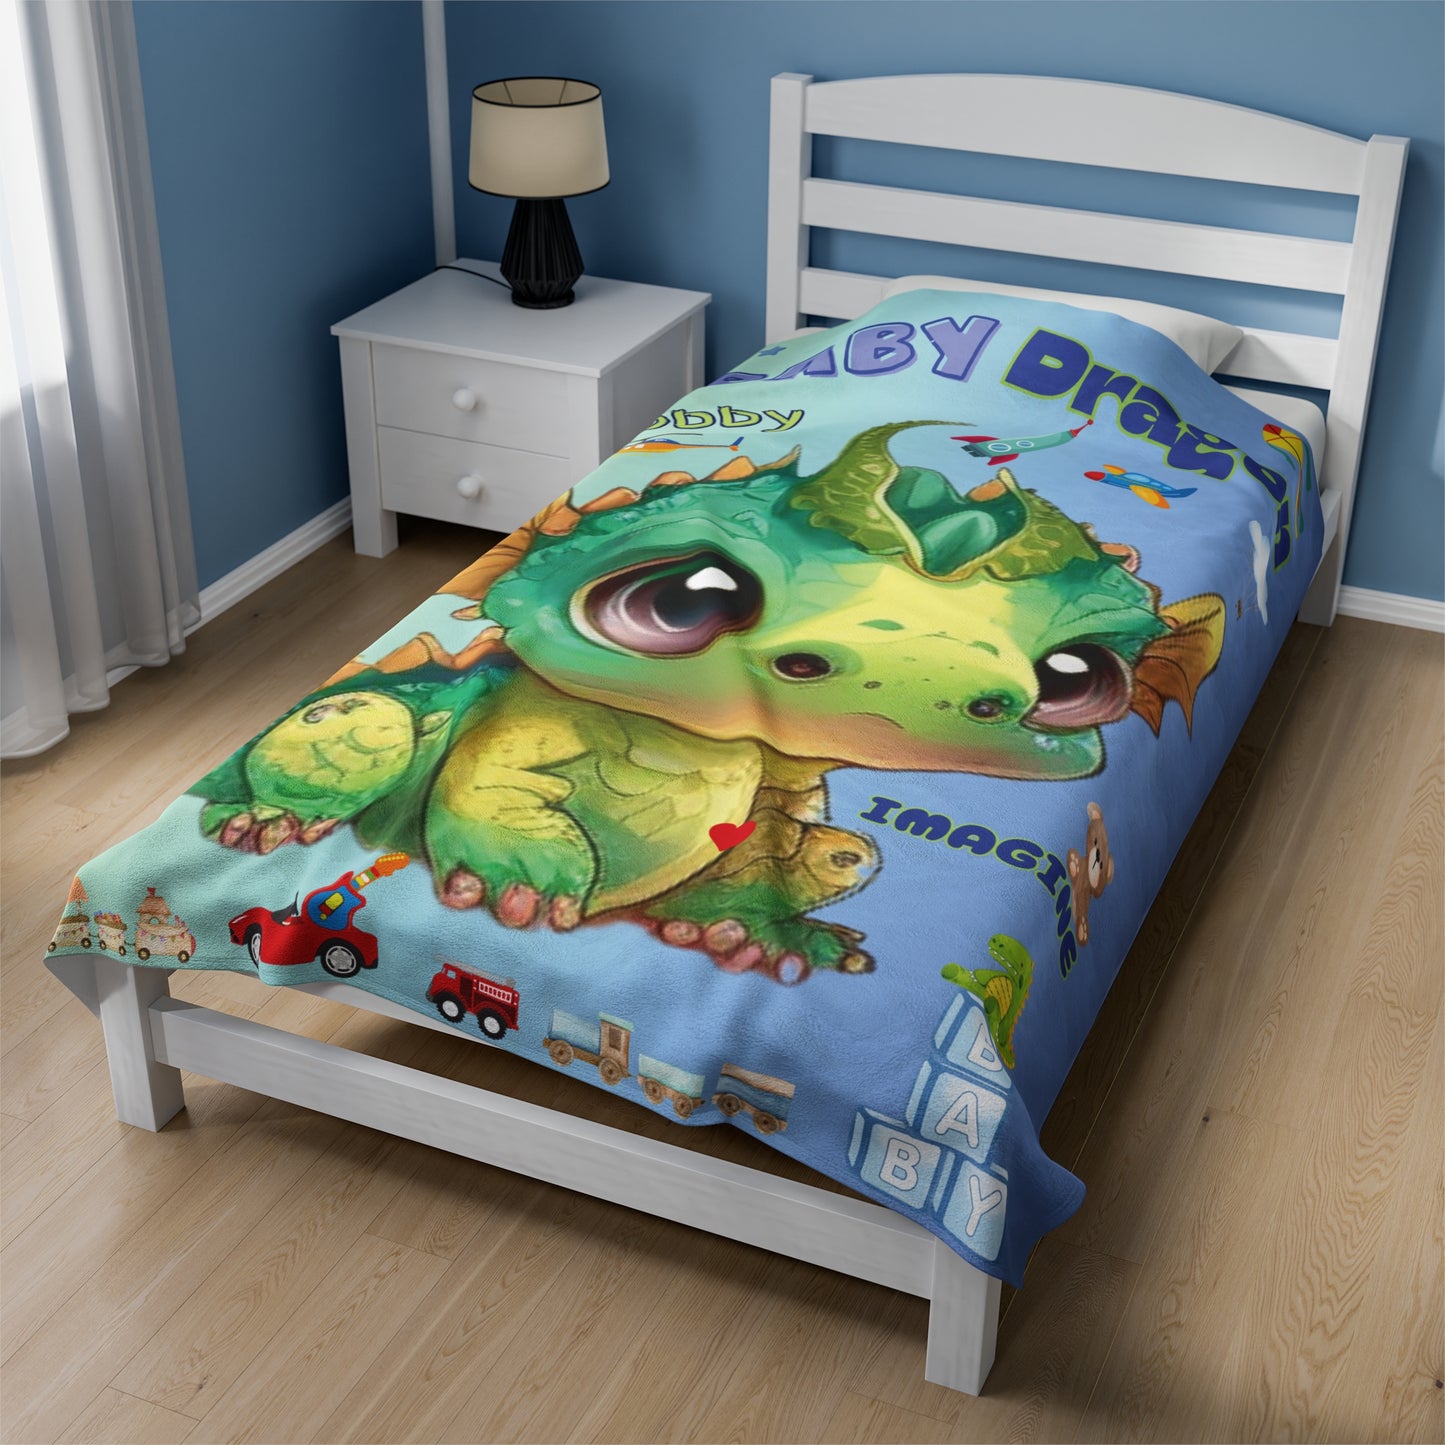 Our velveteen minky soft baby & kids blanket with a large green and gold adorable baby dragon Bobby in the center with boys toys all around, trains, trucks, dinosaurs, rocket ships and planes - the blanket color is gradient going from a beautiful light blue/green to a light blue every little boy will love